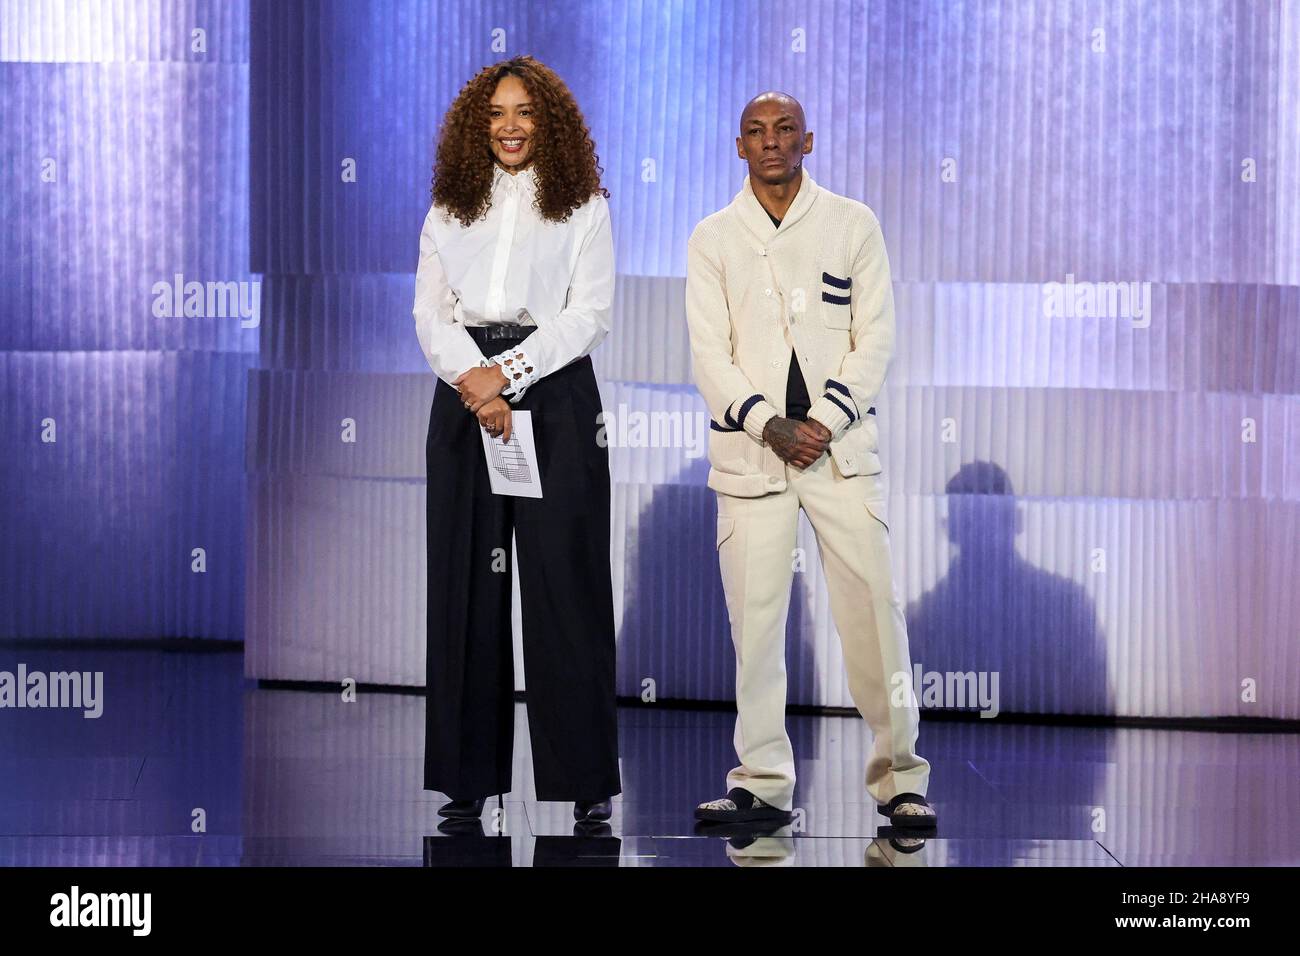 Berlin, Germany. 11th Dec, 2021. Joy Denalane and Tricky are on stage at the 34th European Film Awards. The European Film Academy presents the awards in Berlin. Credit: Christian Mang/Reuters/Pool/dpa/Alamy Live News Stock Photo